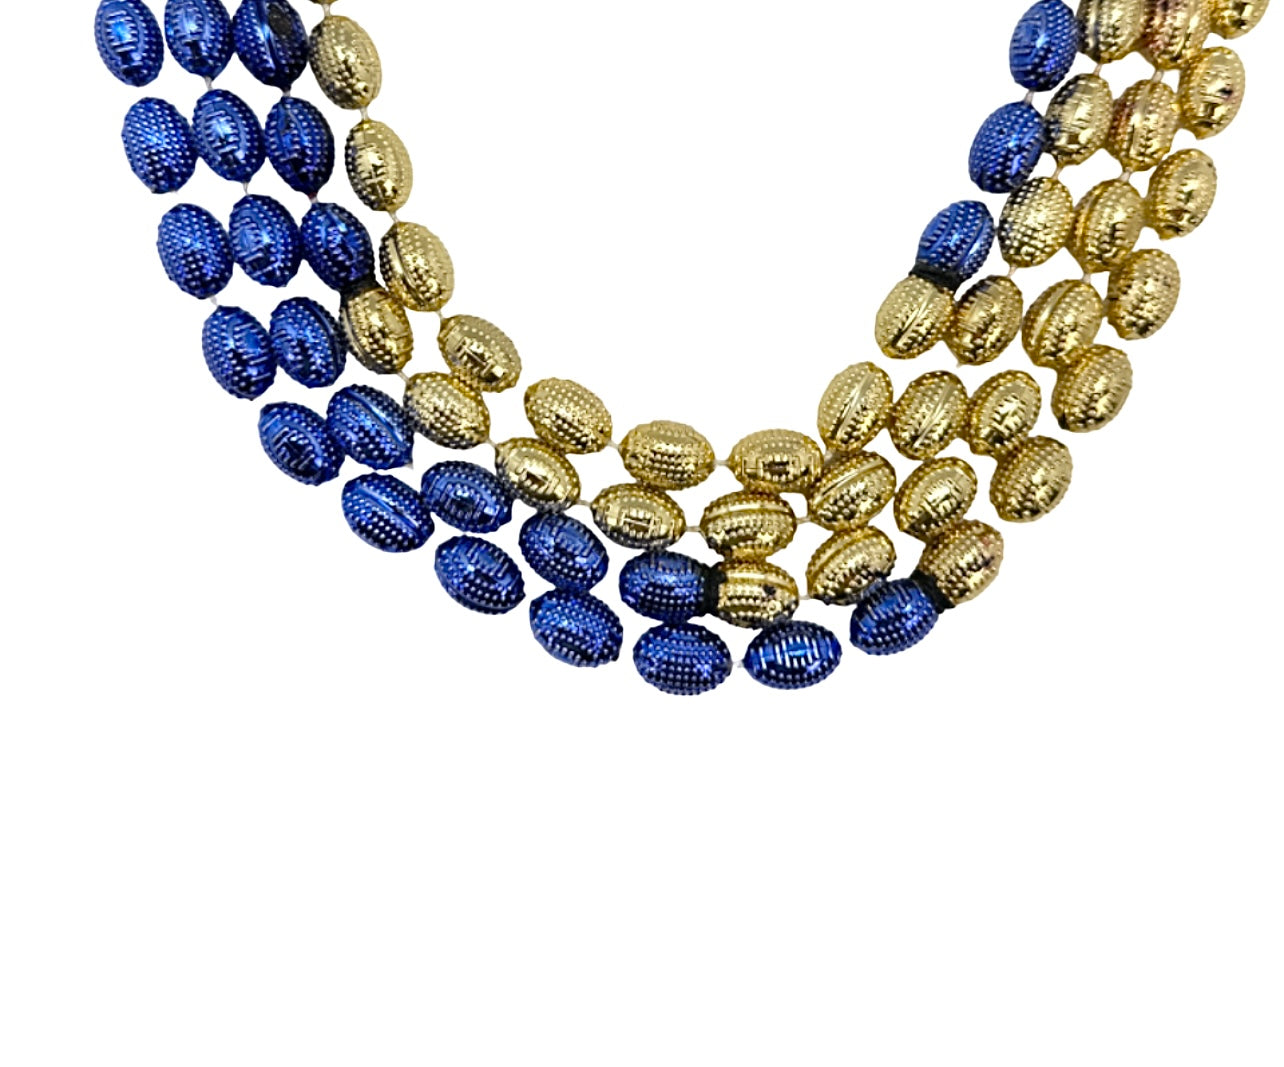 36" Sectional Gold & Blue Football Bead